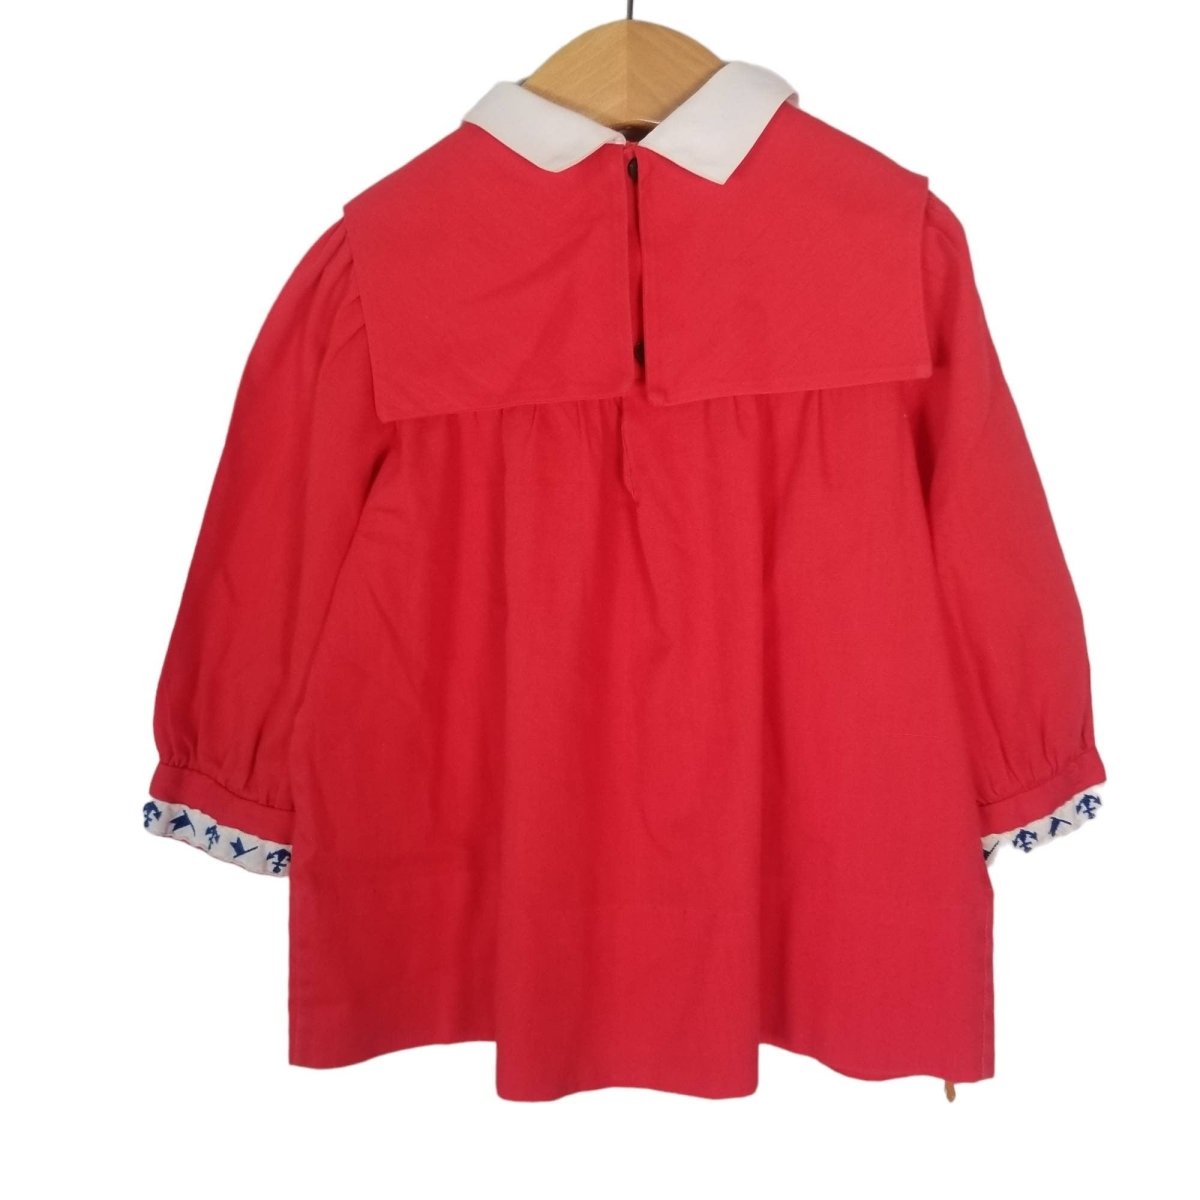 70s/80s Polly Flinders Smocked Red Anchor Dress 2T - themallvintage The Mall Vintage